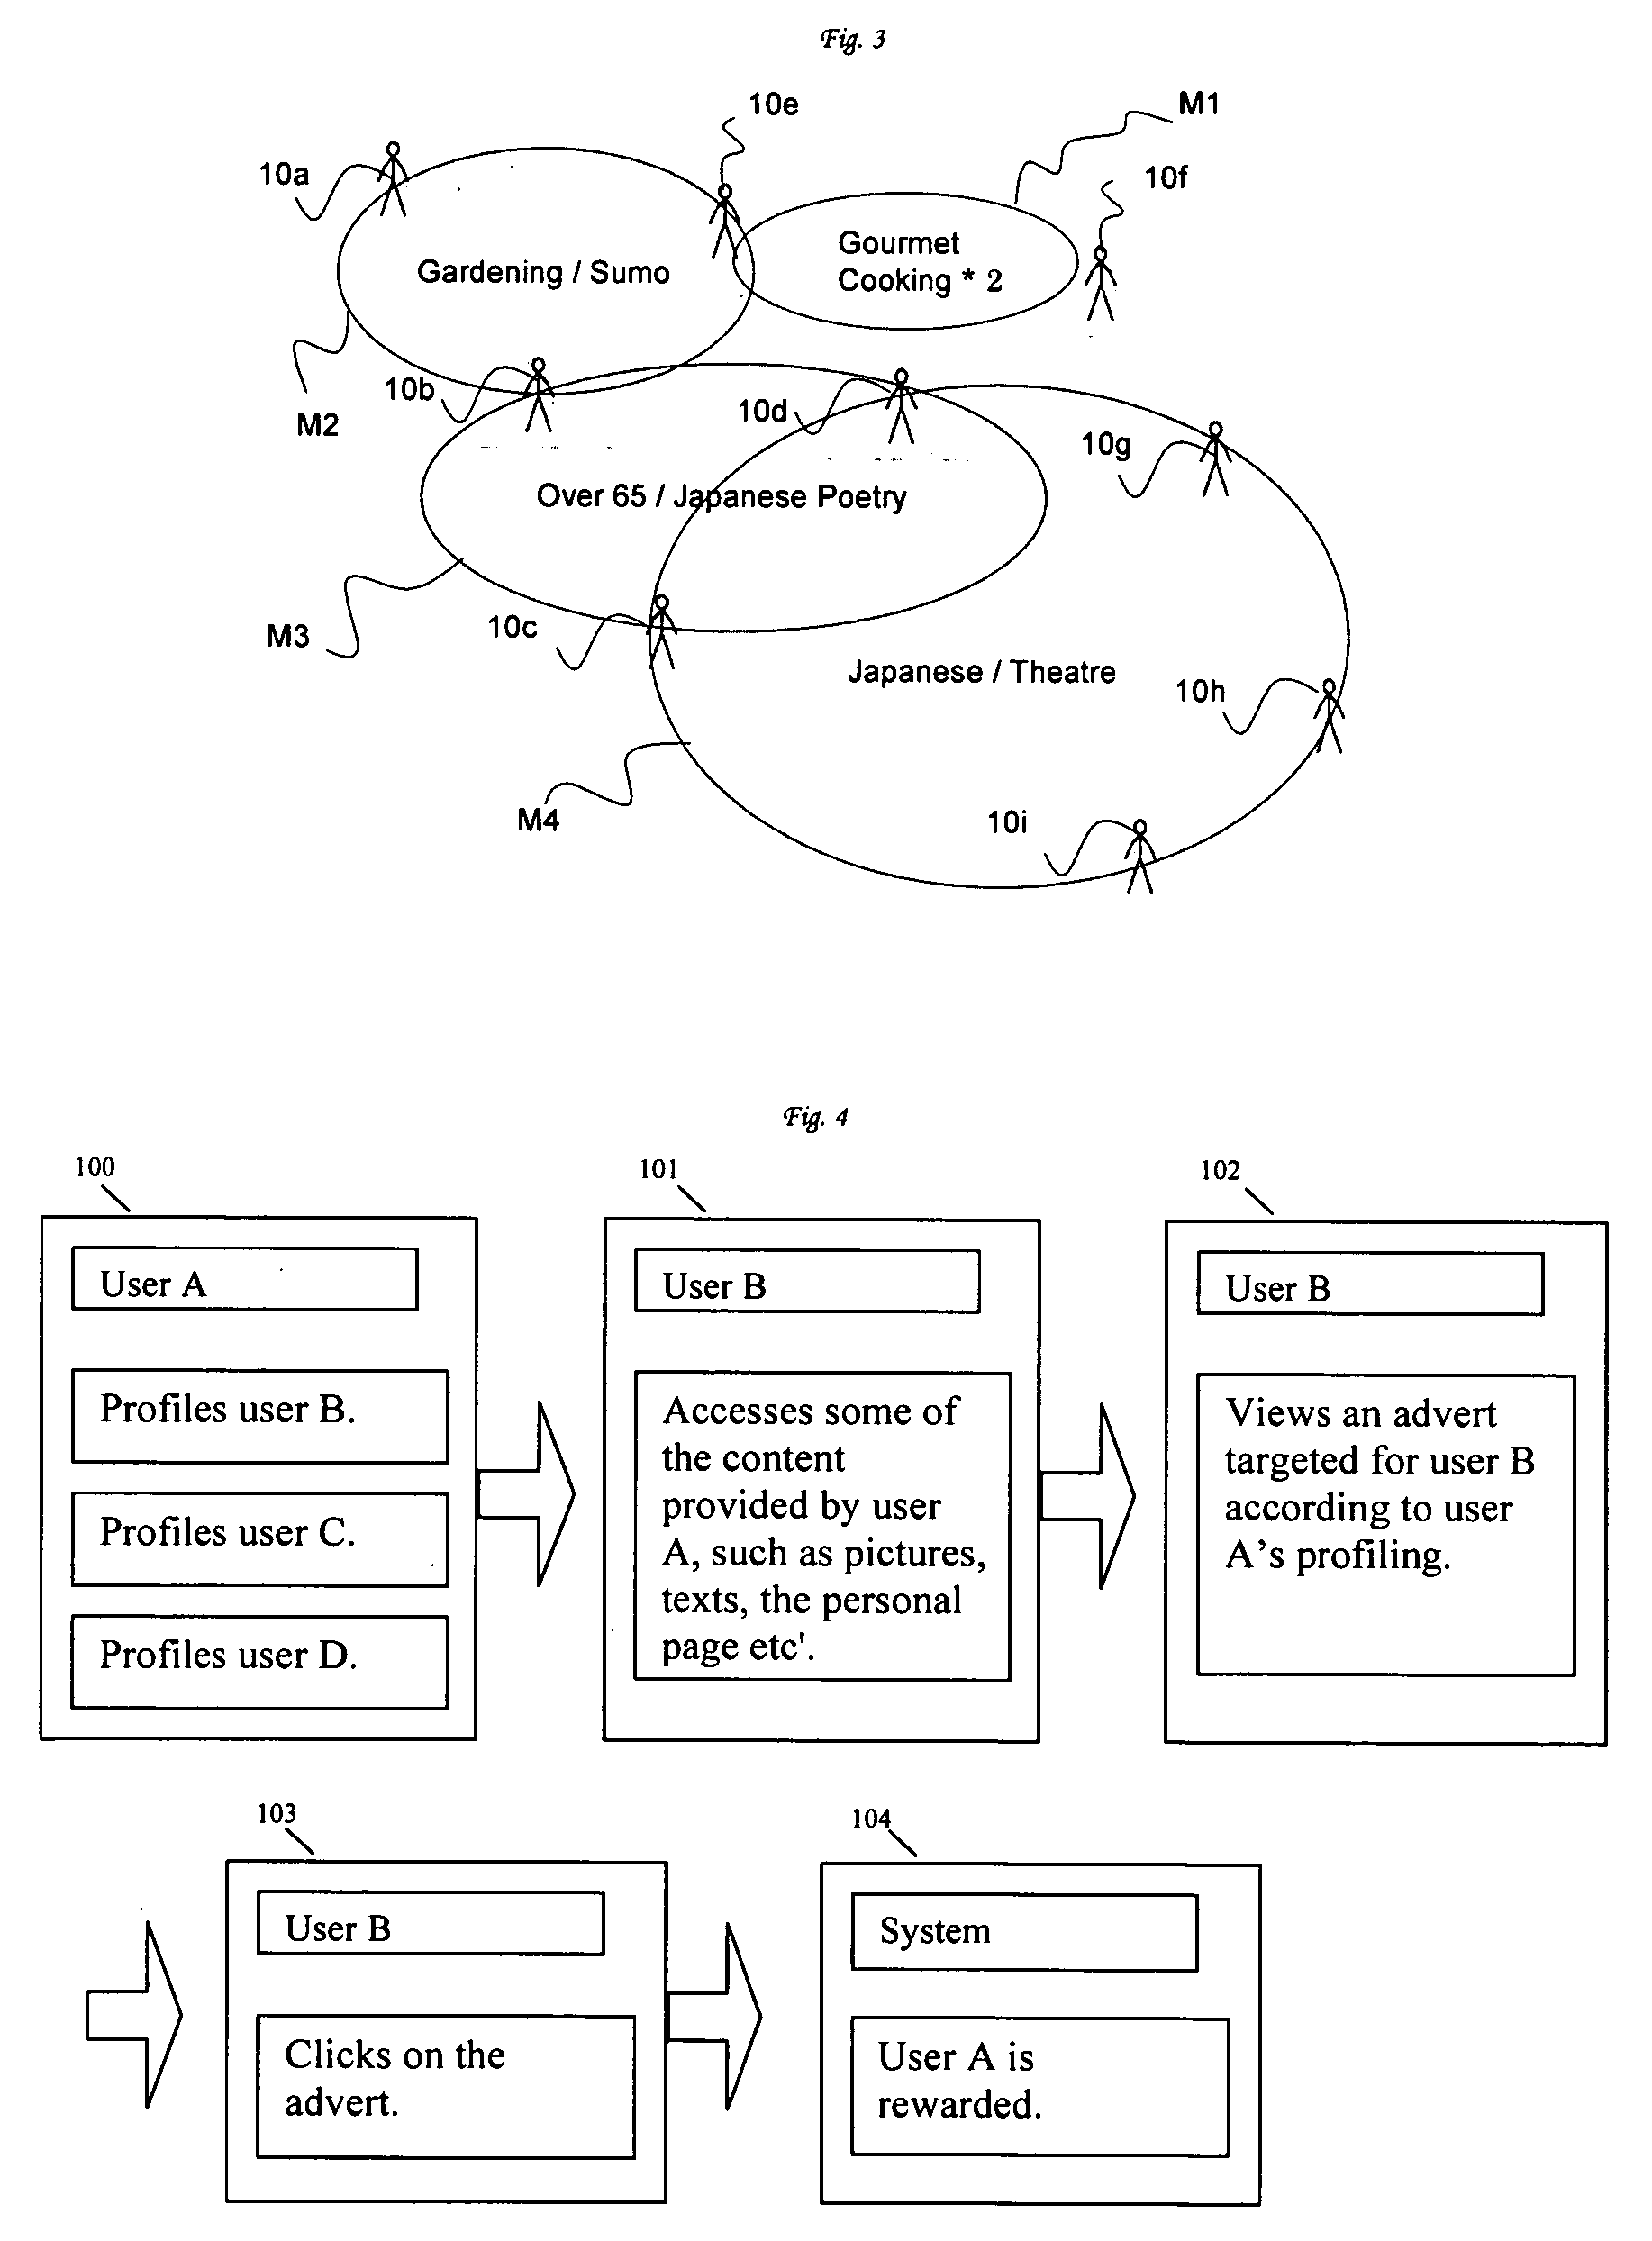 Method for increasing the accuracy of social network profiles